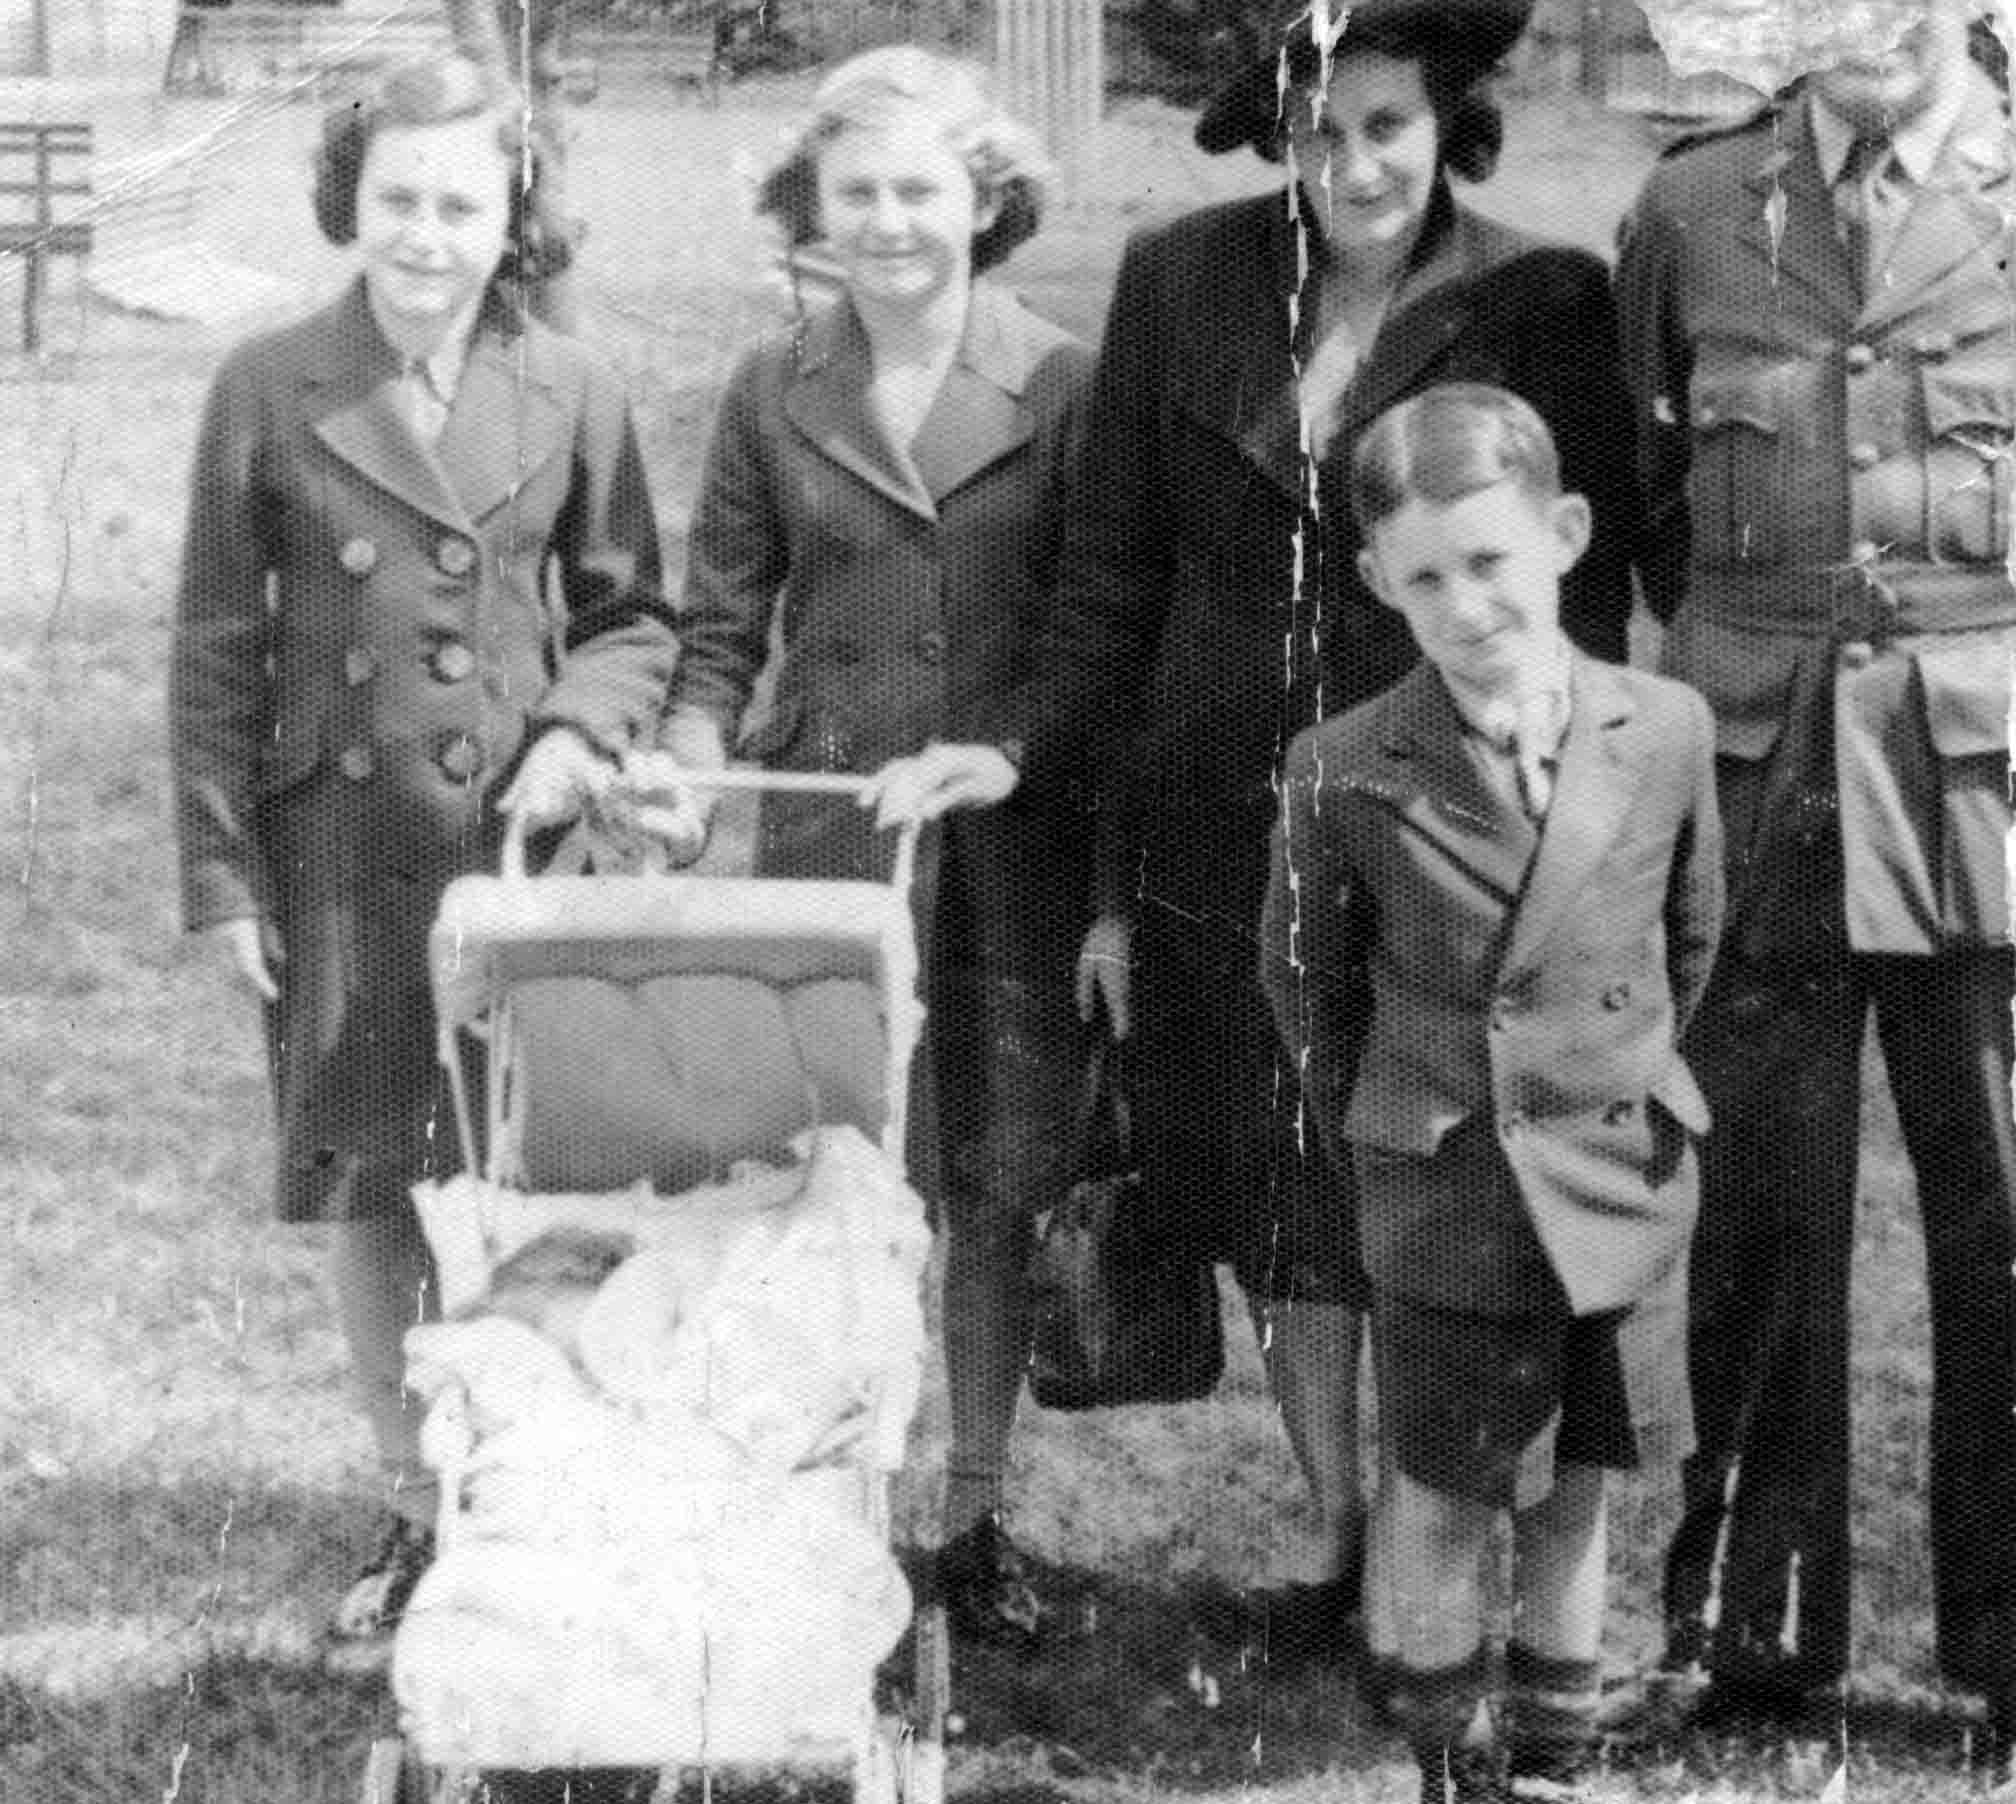 Raema, Patricia, mother Kathleen, Kevin and Oswald Keith Brown, Kay Brown in pram